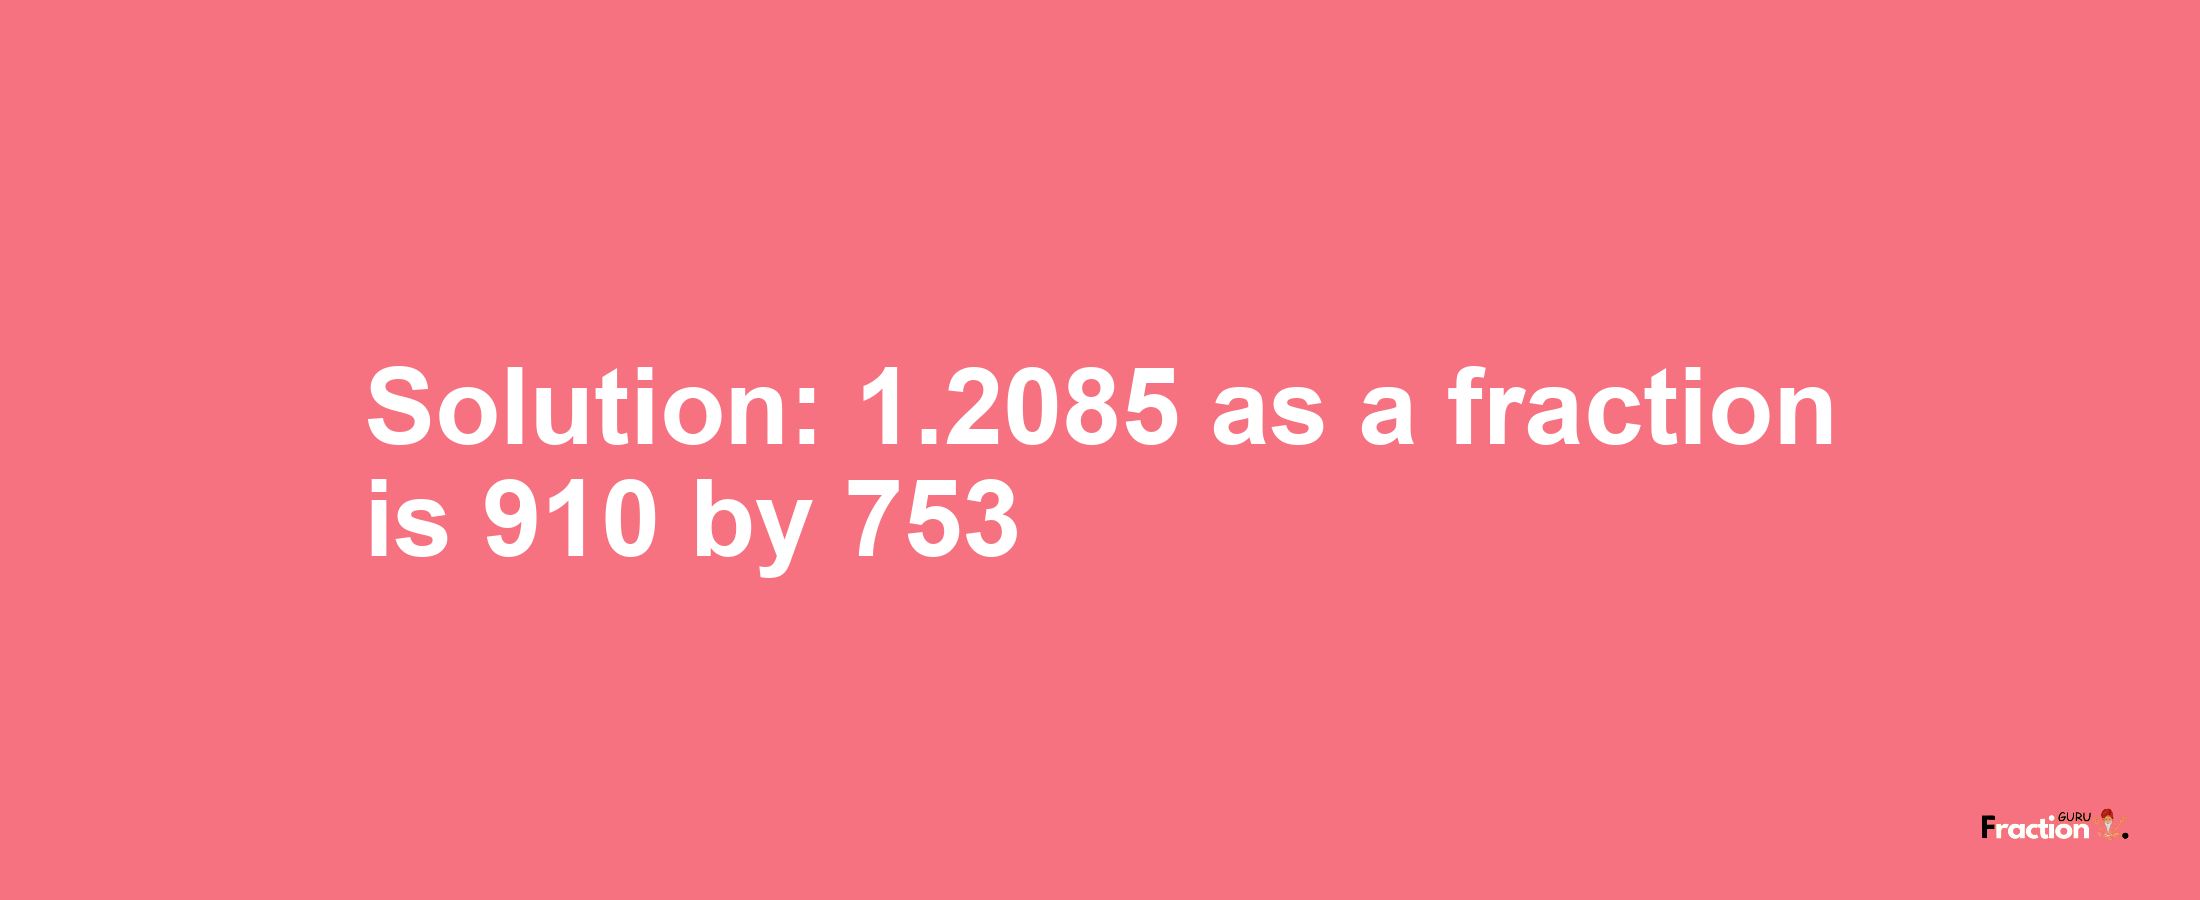 Solution:1.2085 as a fraction is 910/753